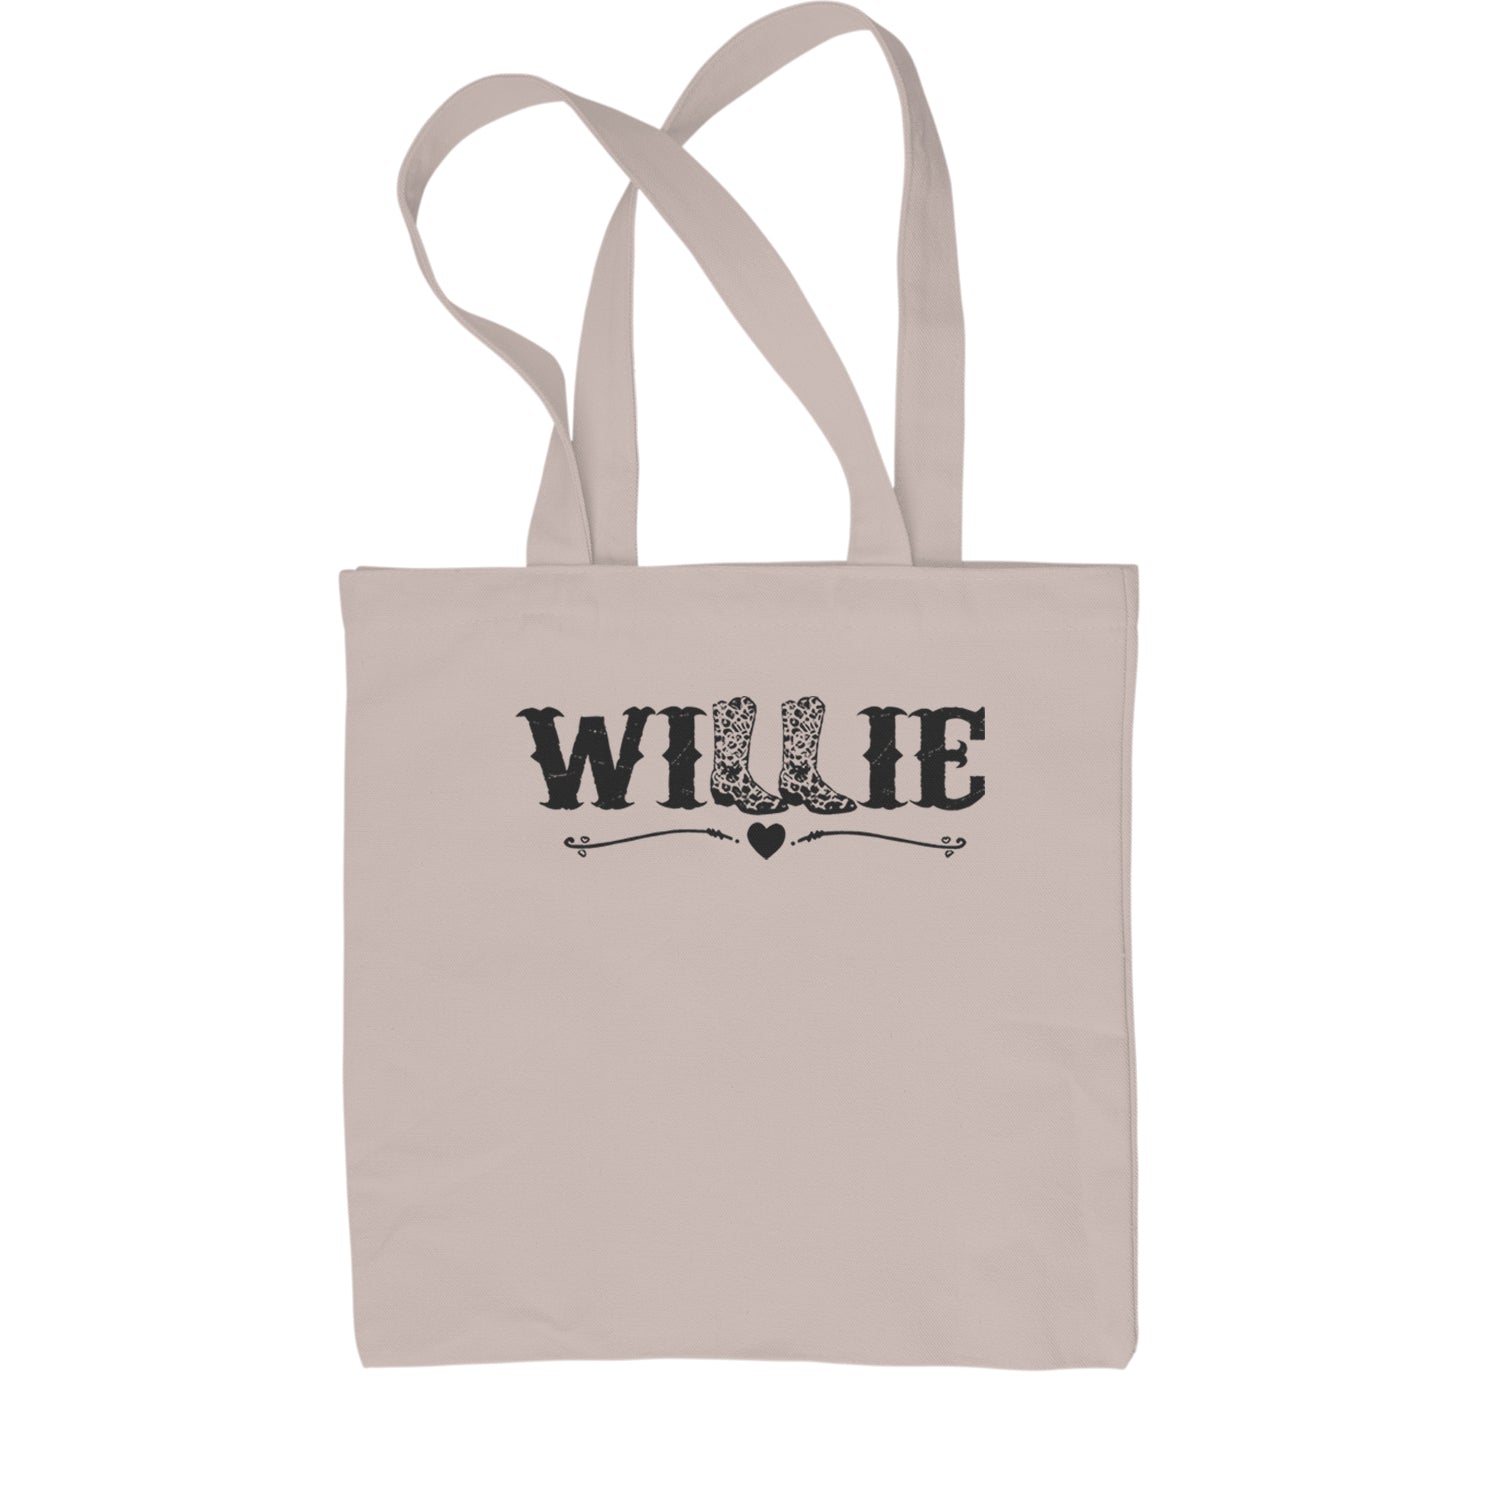 Willie Cowboy Boots Hippy Country Music Shopping Tote Bag